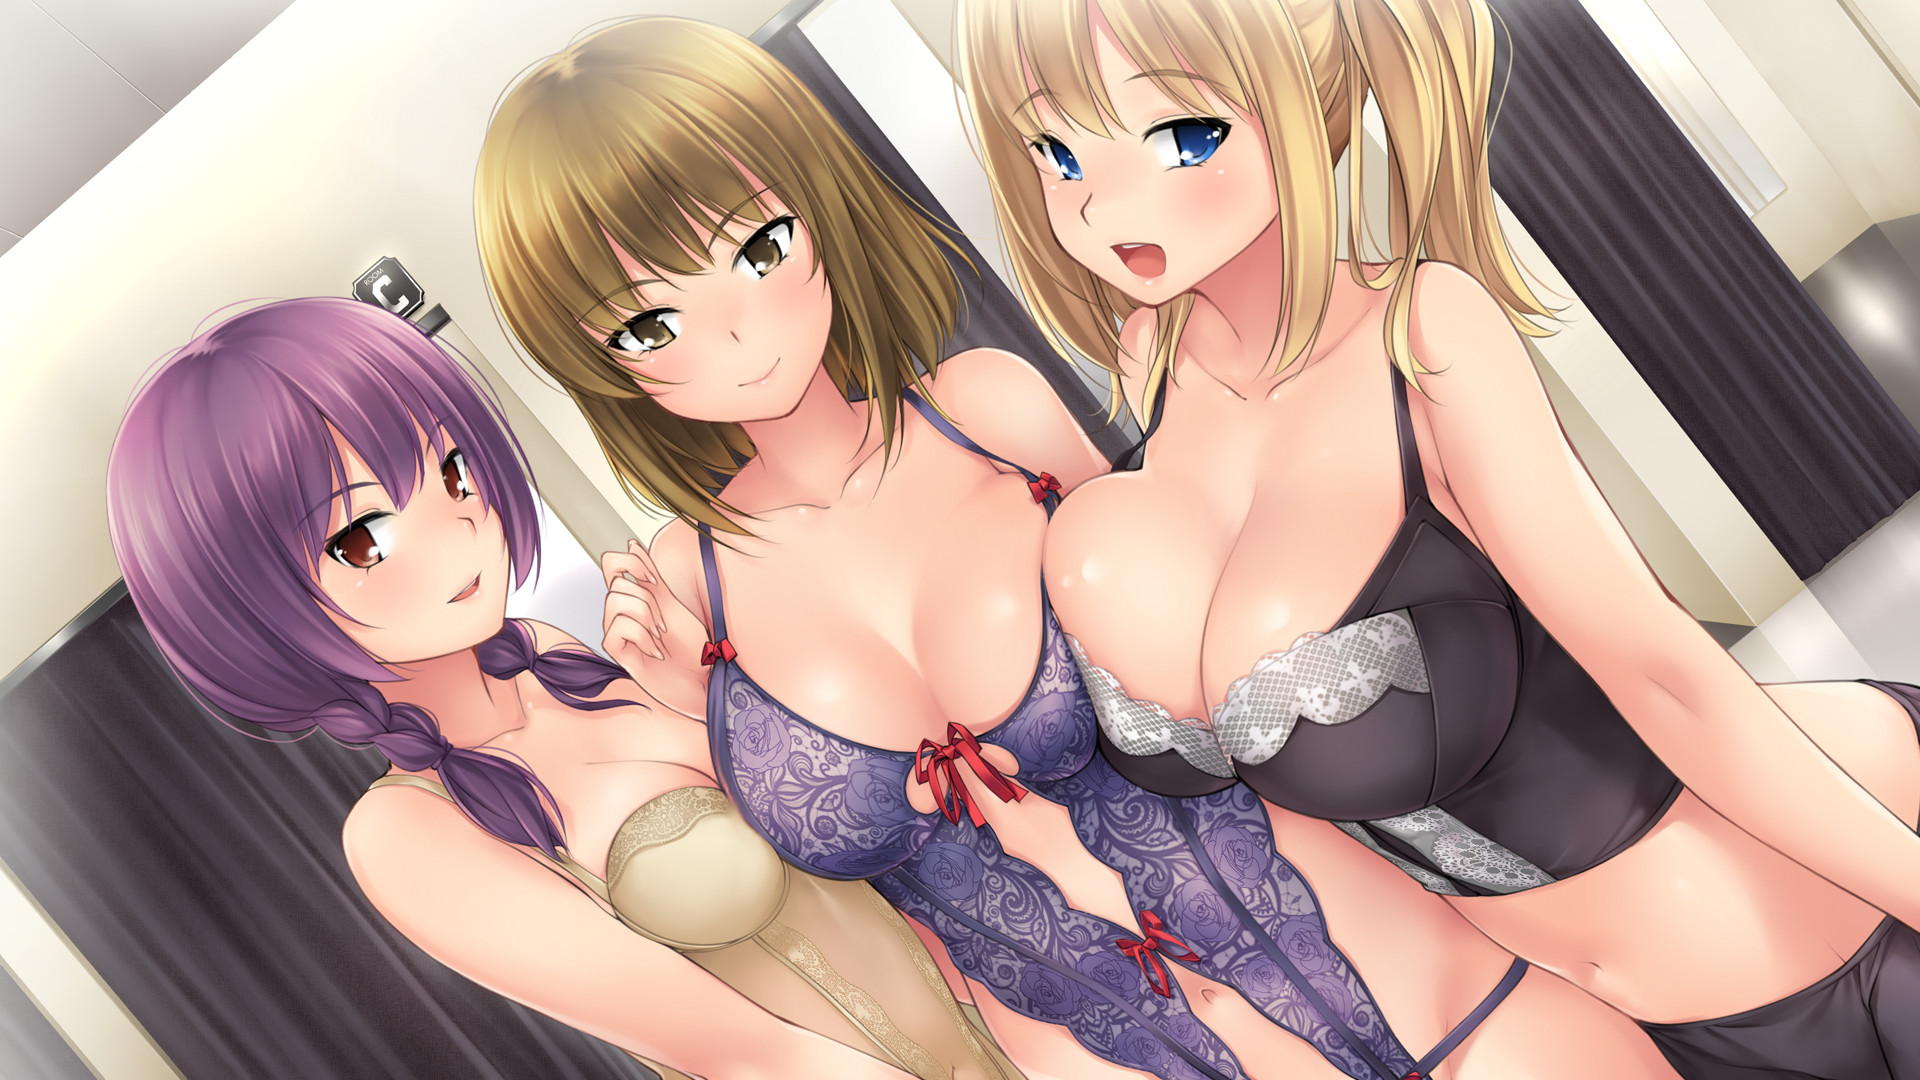 Negligee Visual Novel Porn - Negligee Free Game Full Download - Free PC Games Den